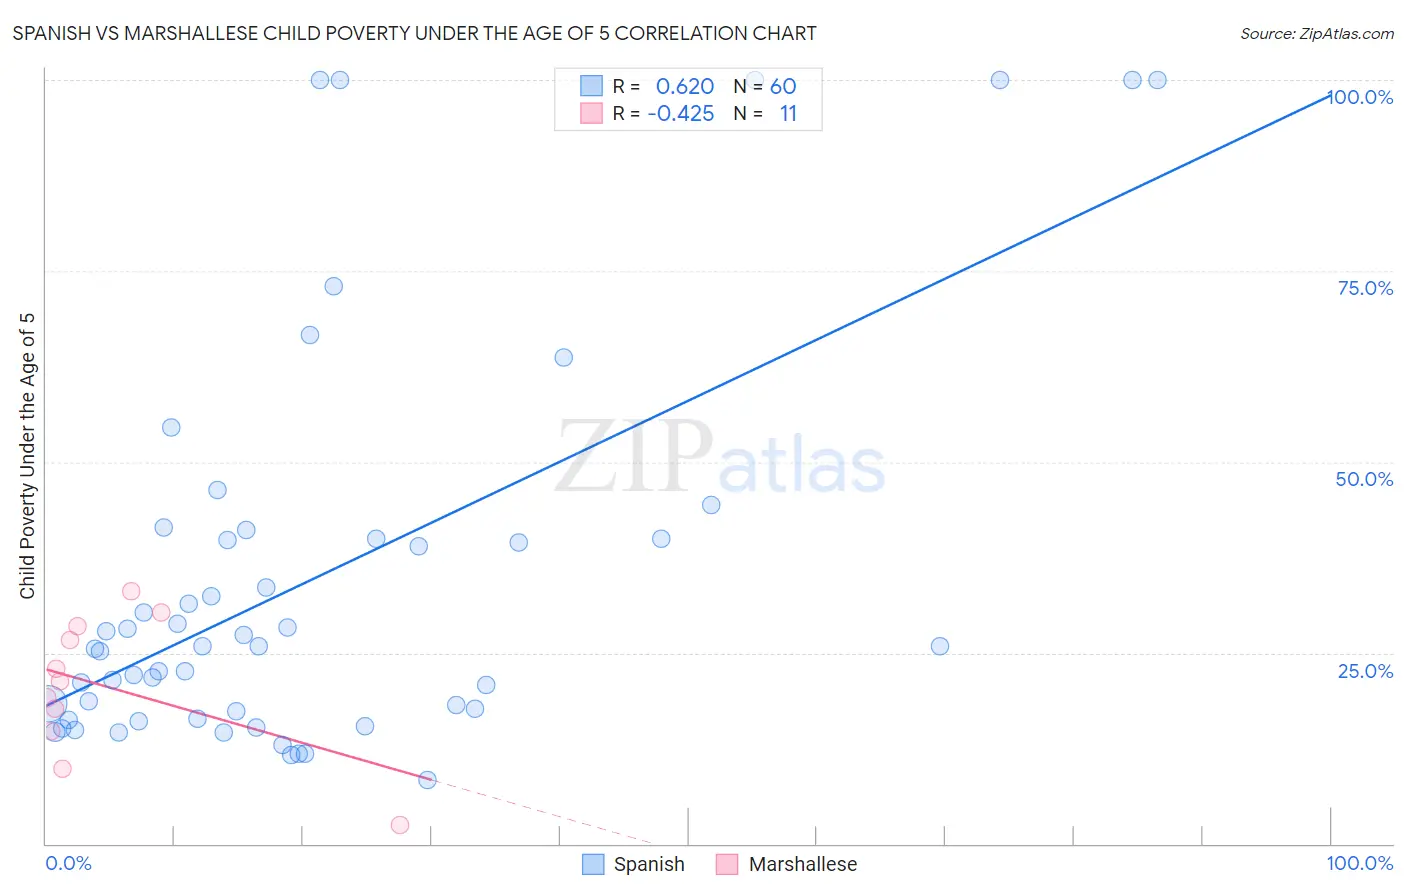 Spanish vs Marshallese Child Poverty Under the Age of 5